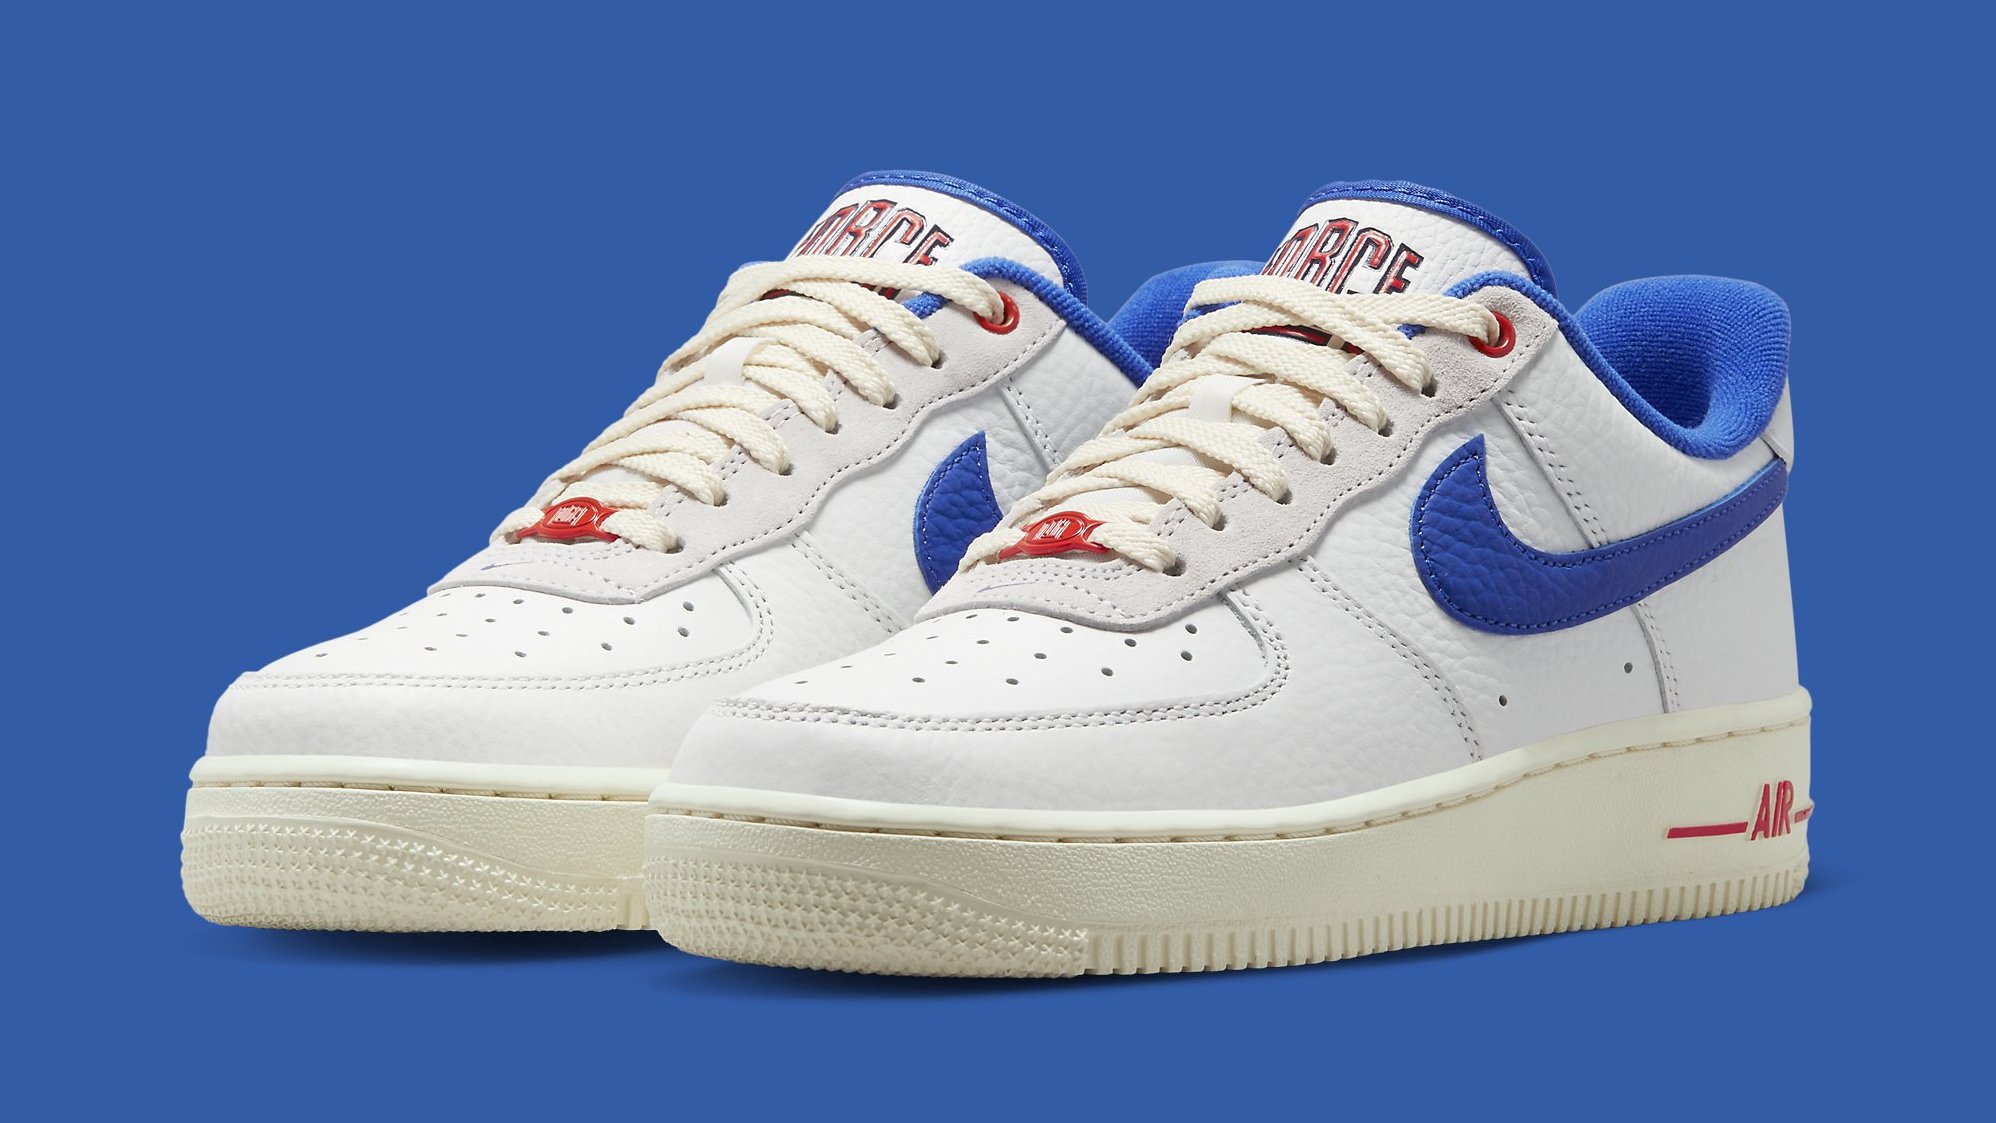 Nike WMNS Air Force 1 Low Command Force University Blue